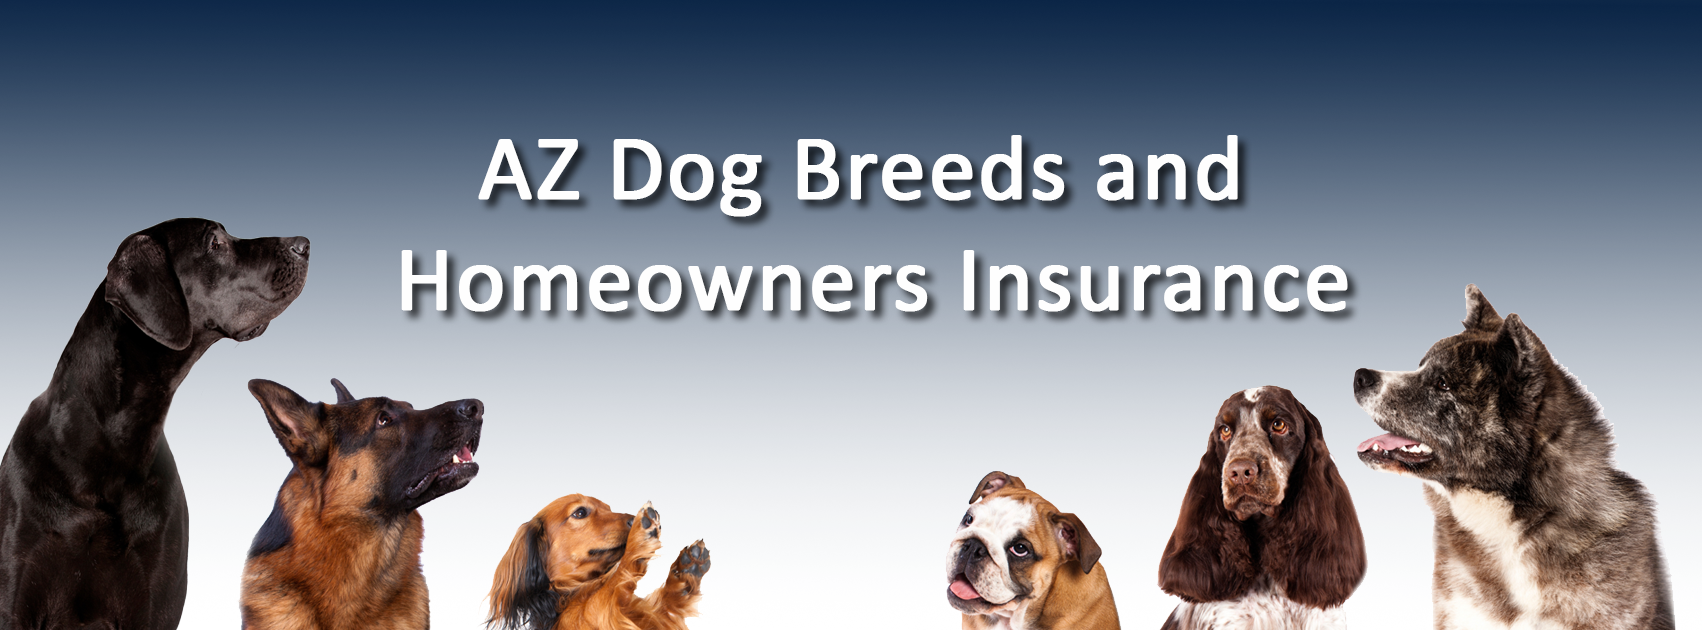 Homeowners insurance and dogs